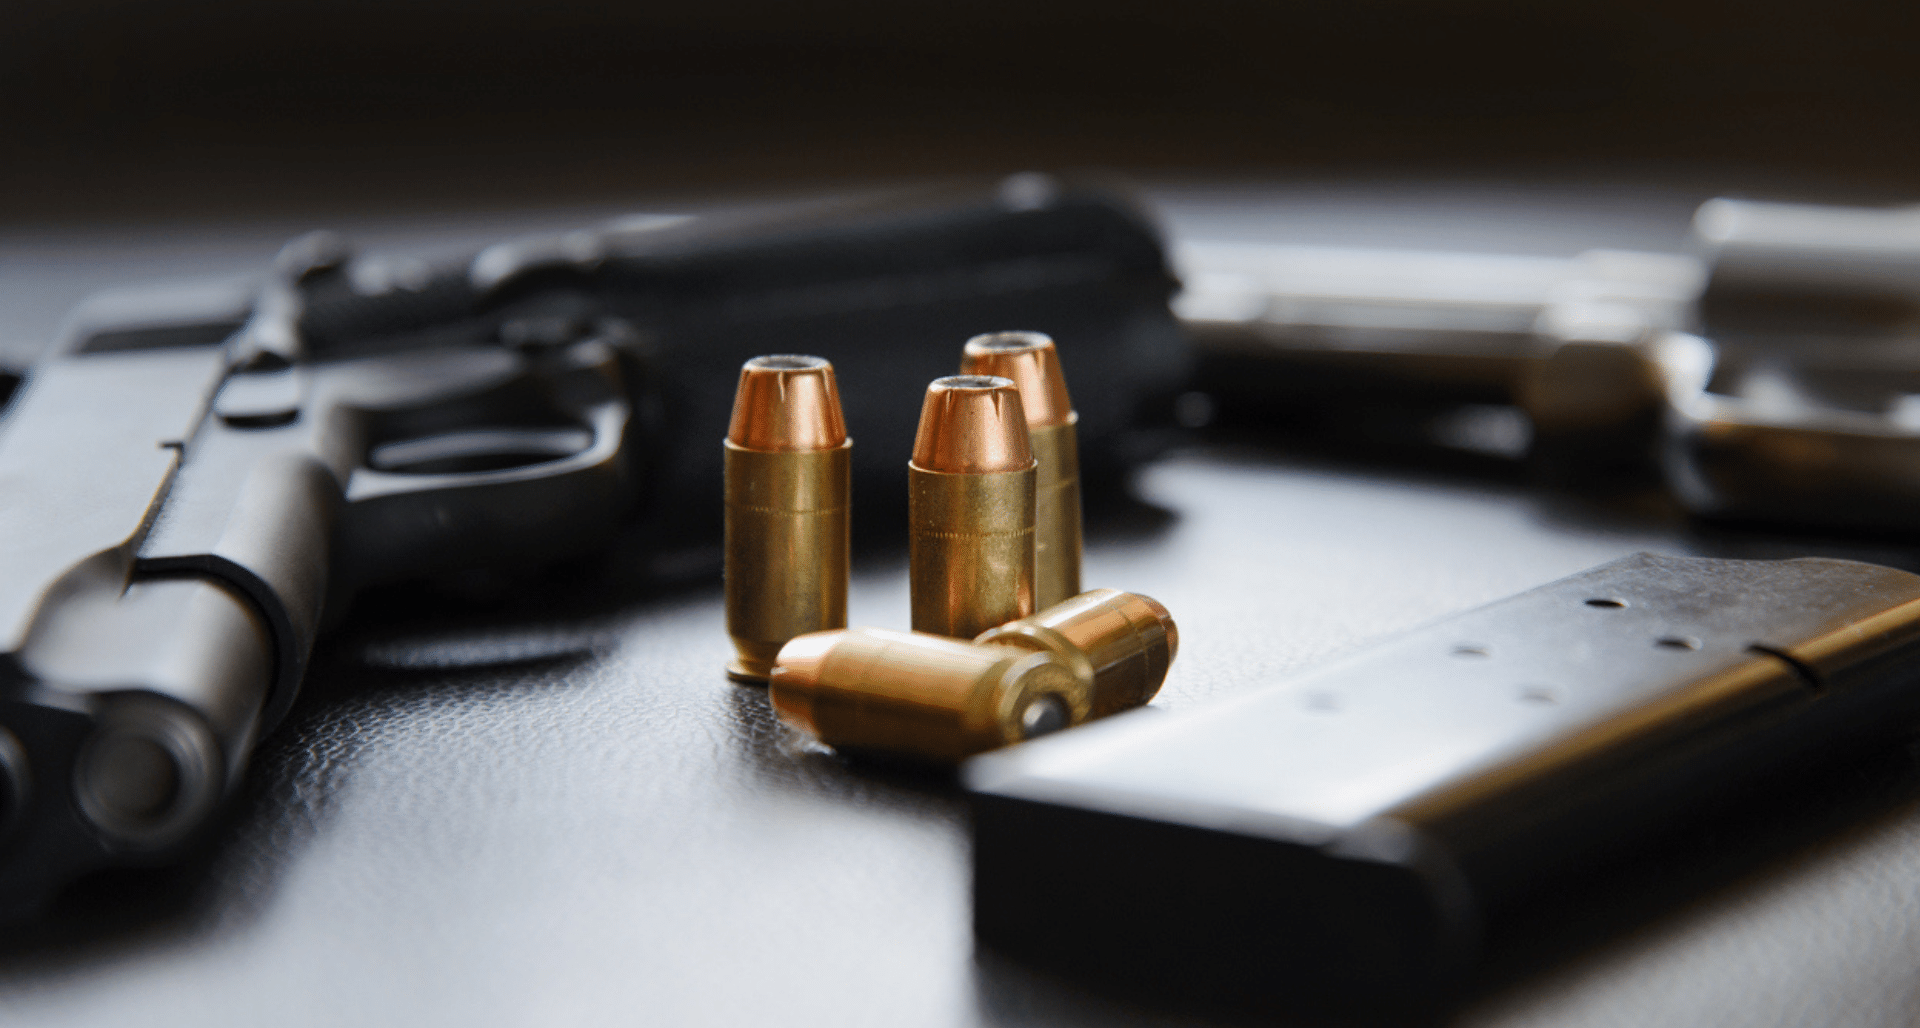 Hollow Point vs Regular Bullets: What’s the difference?